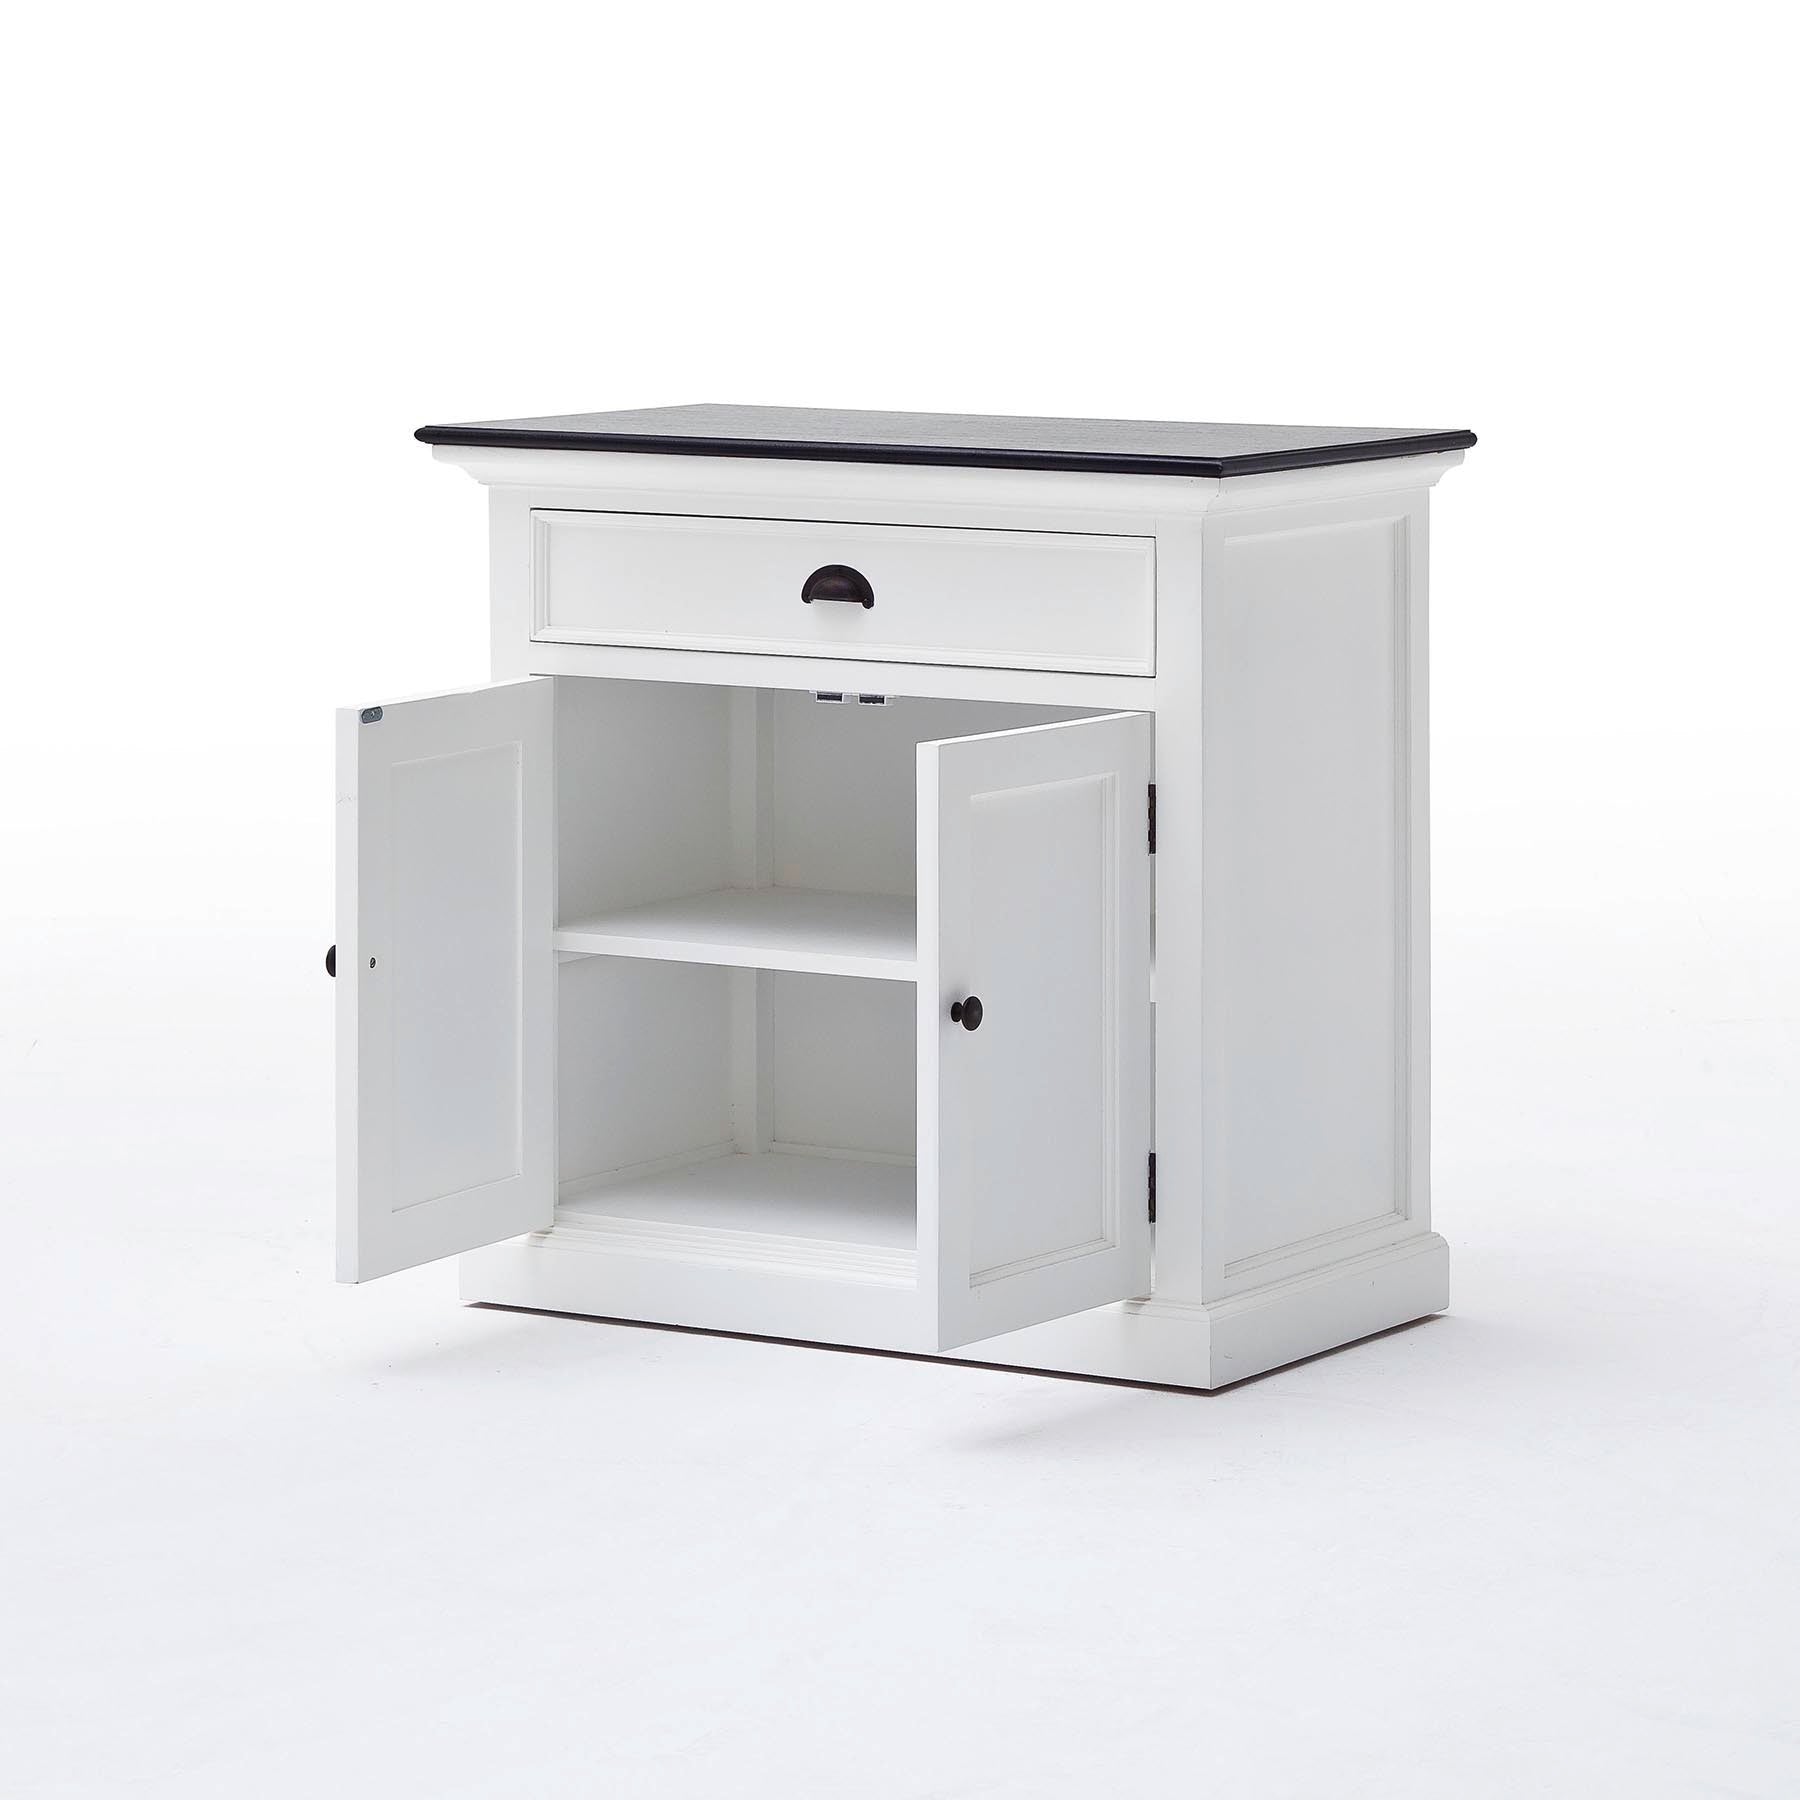 Halifax Contrast Small sideboard with 1 drawer